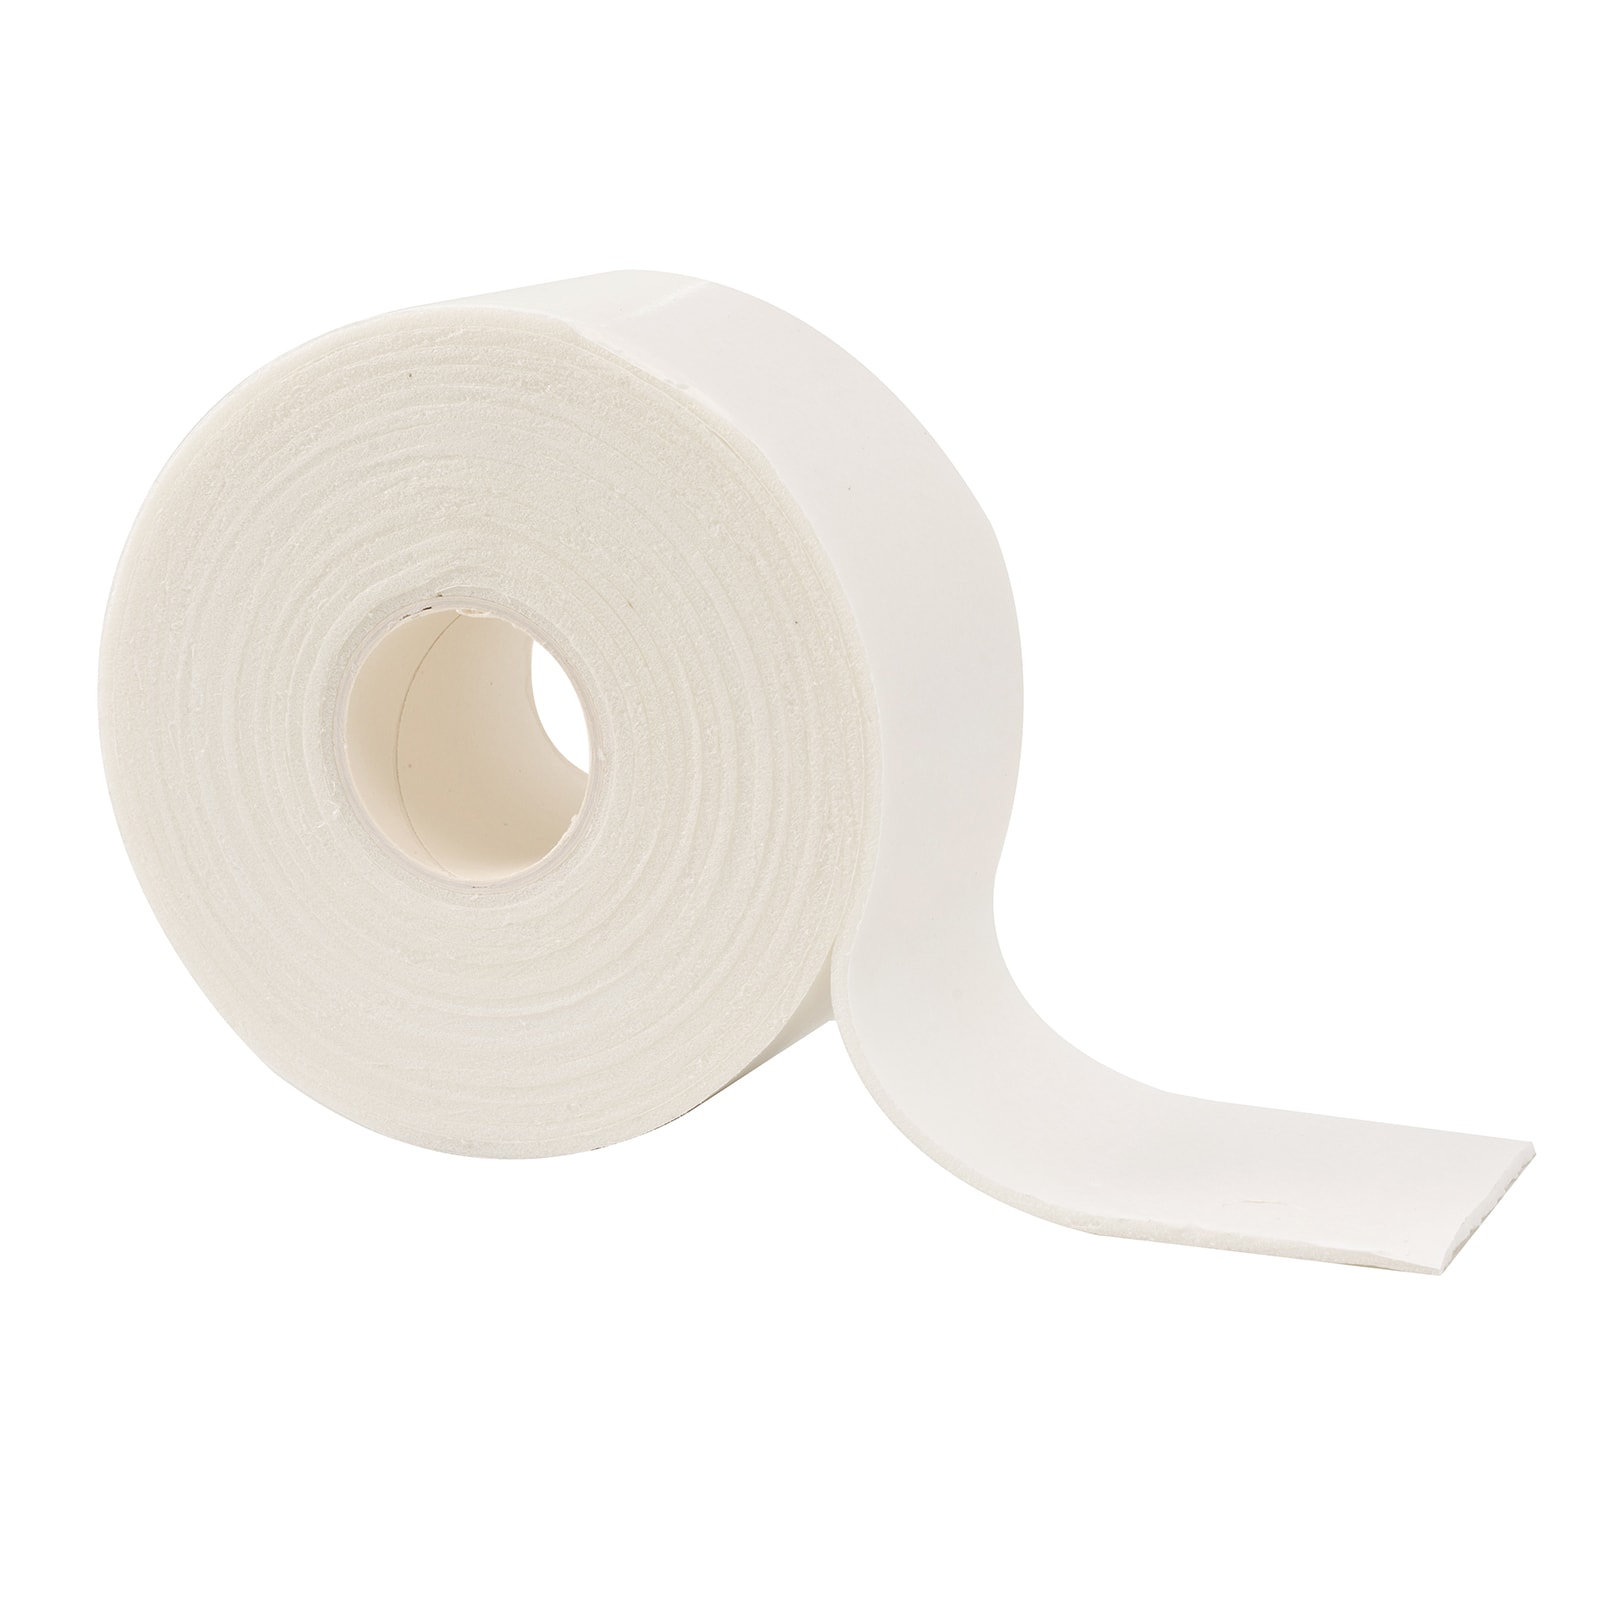 Instant Dimension Foam Tape - Double-sided Adhesive